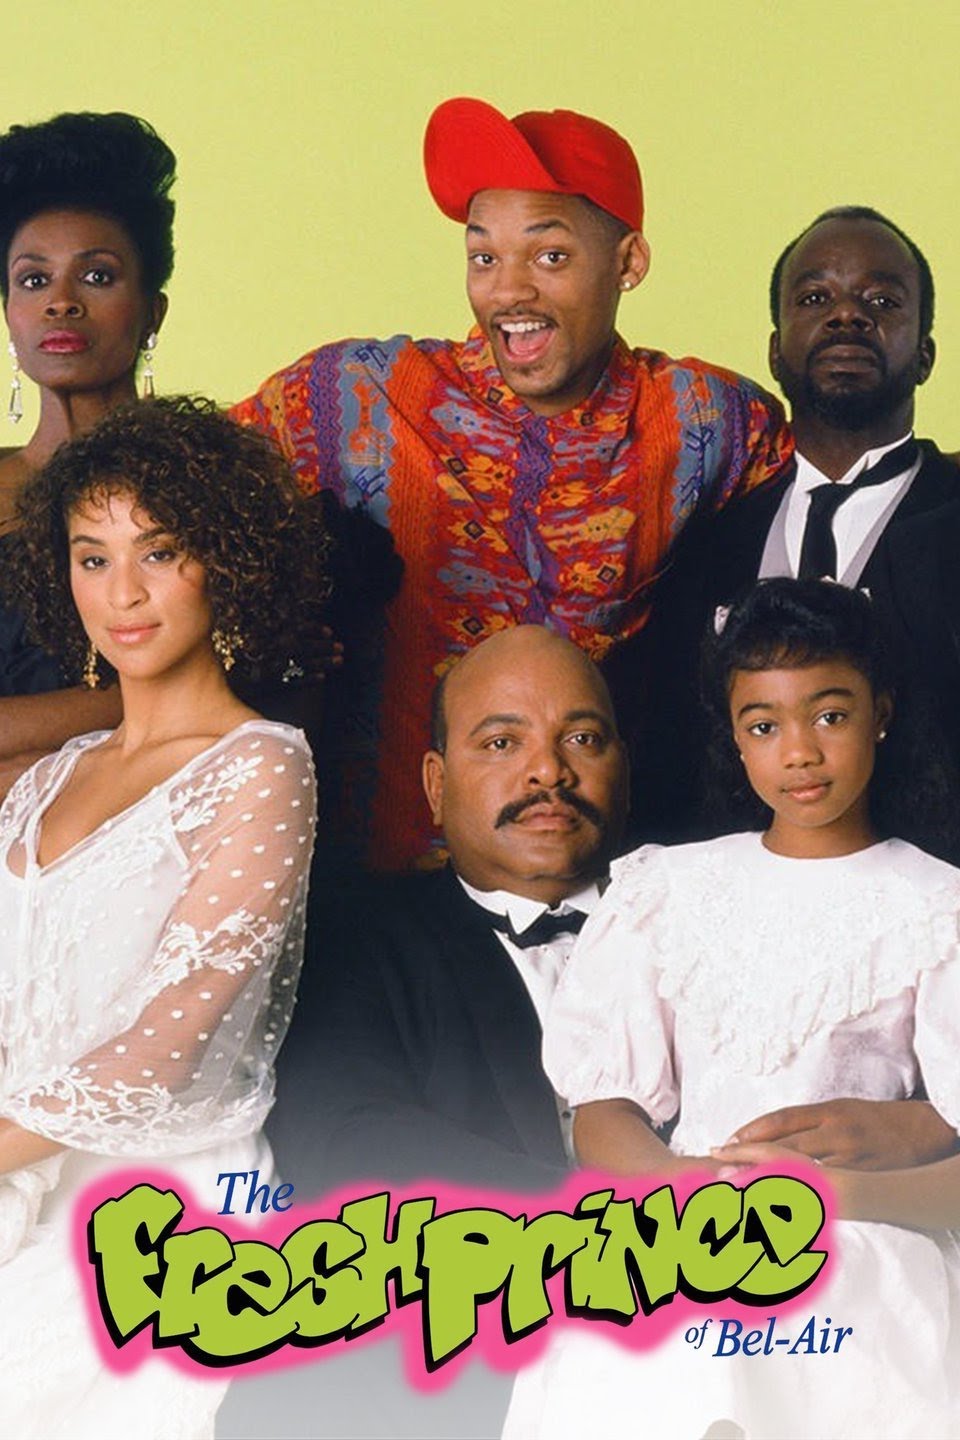 Fresh Prince of Bel-Air is Back but with a Twist